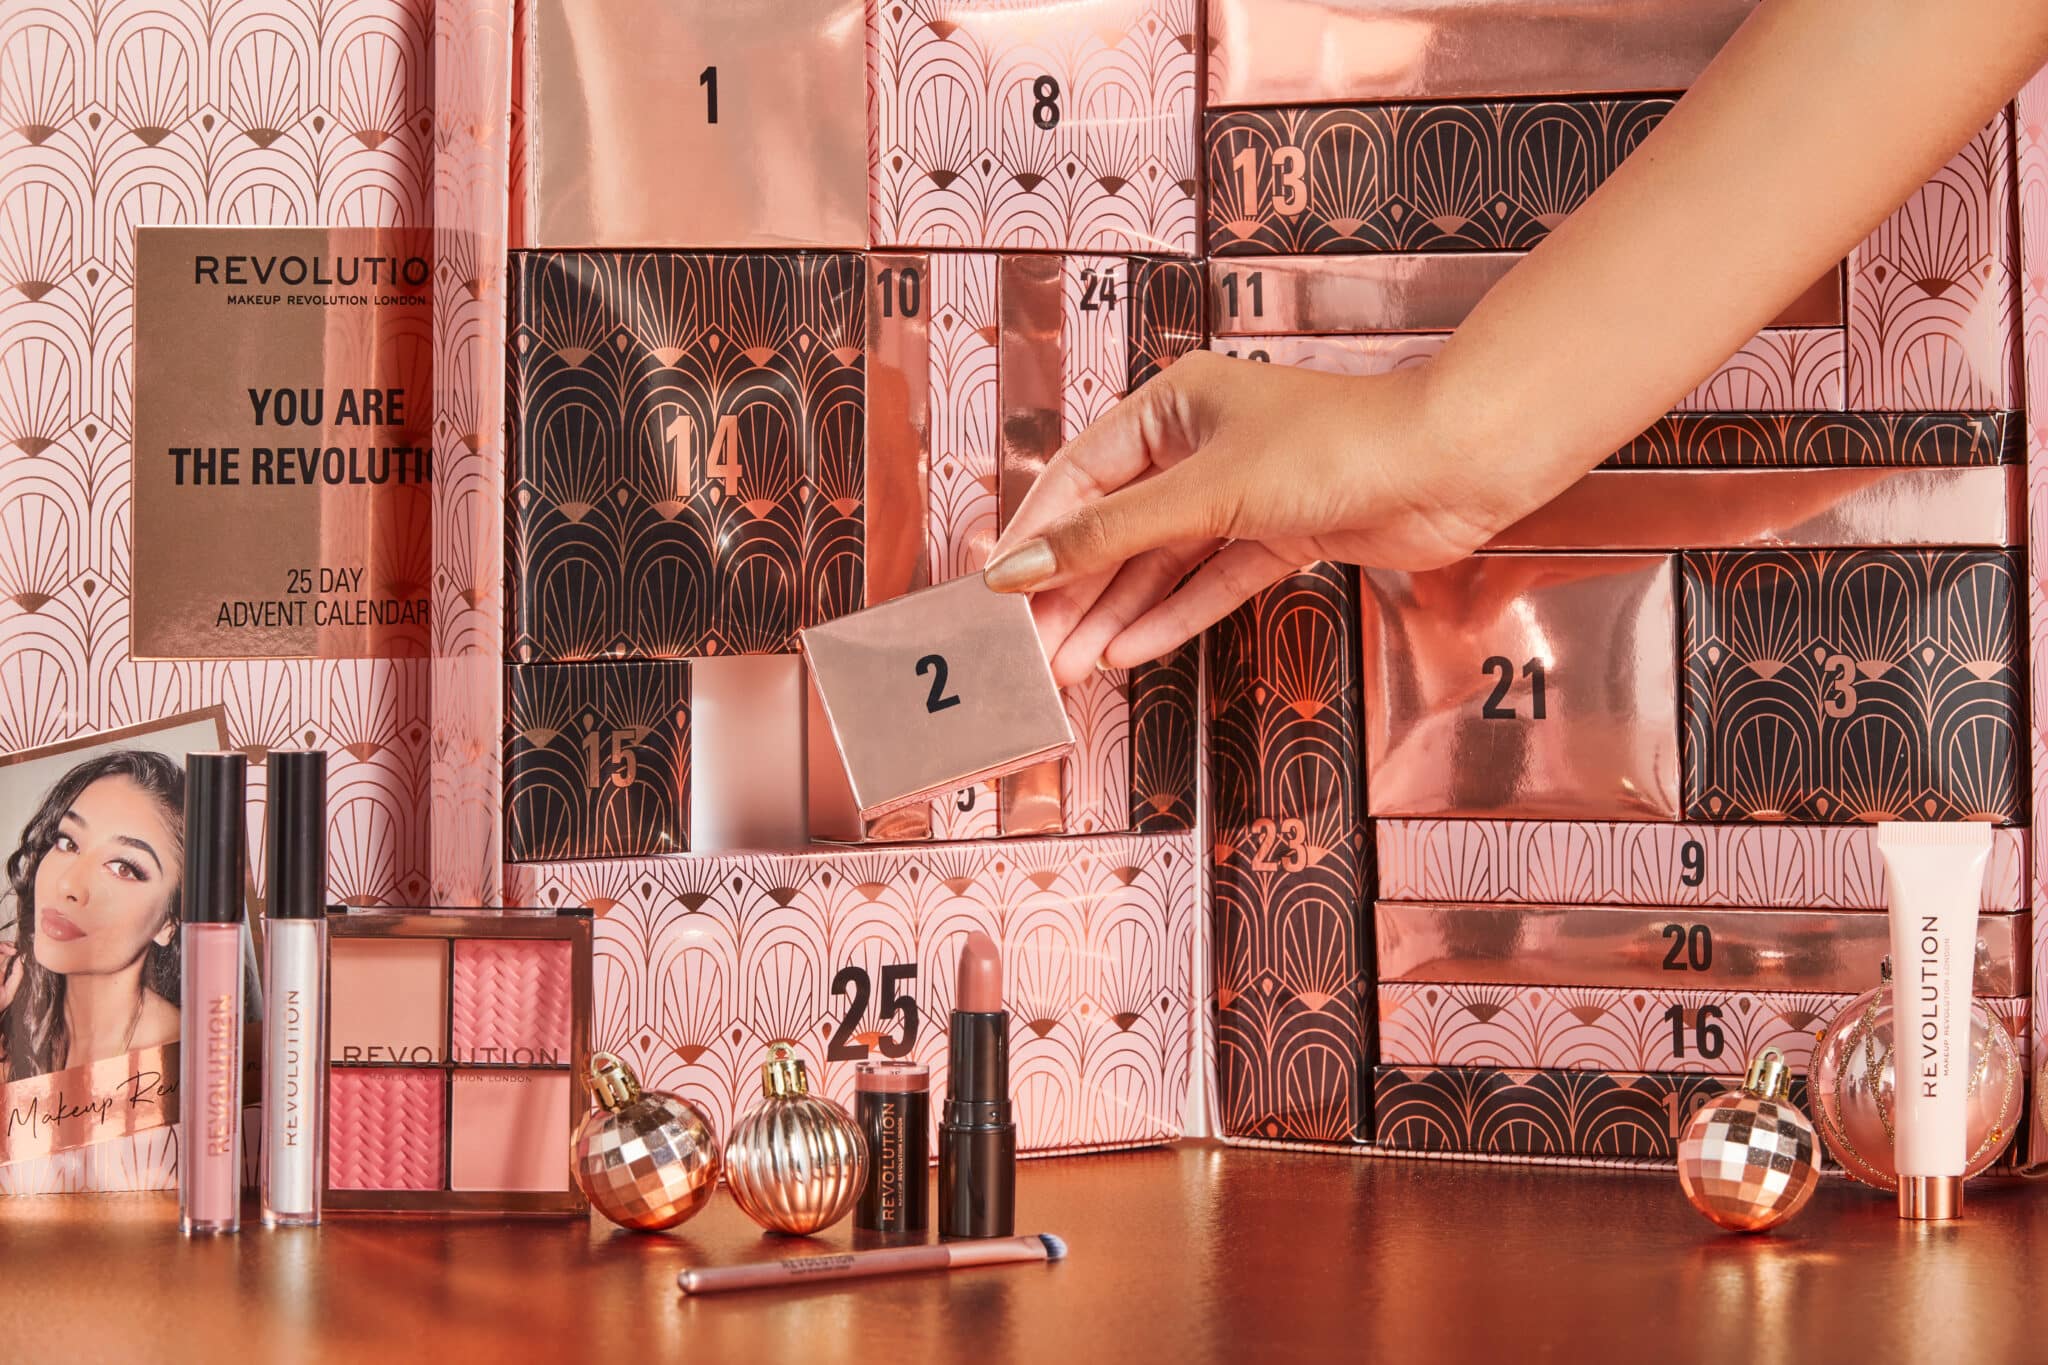 Revolution Beauty Advent Calendar features 25 doors with gifts behind each one.